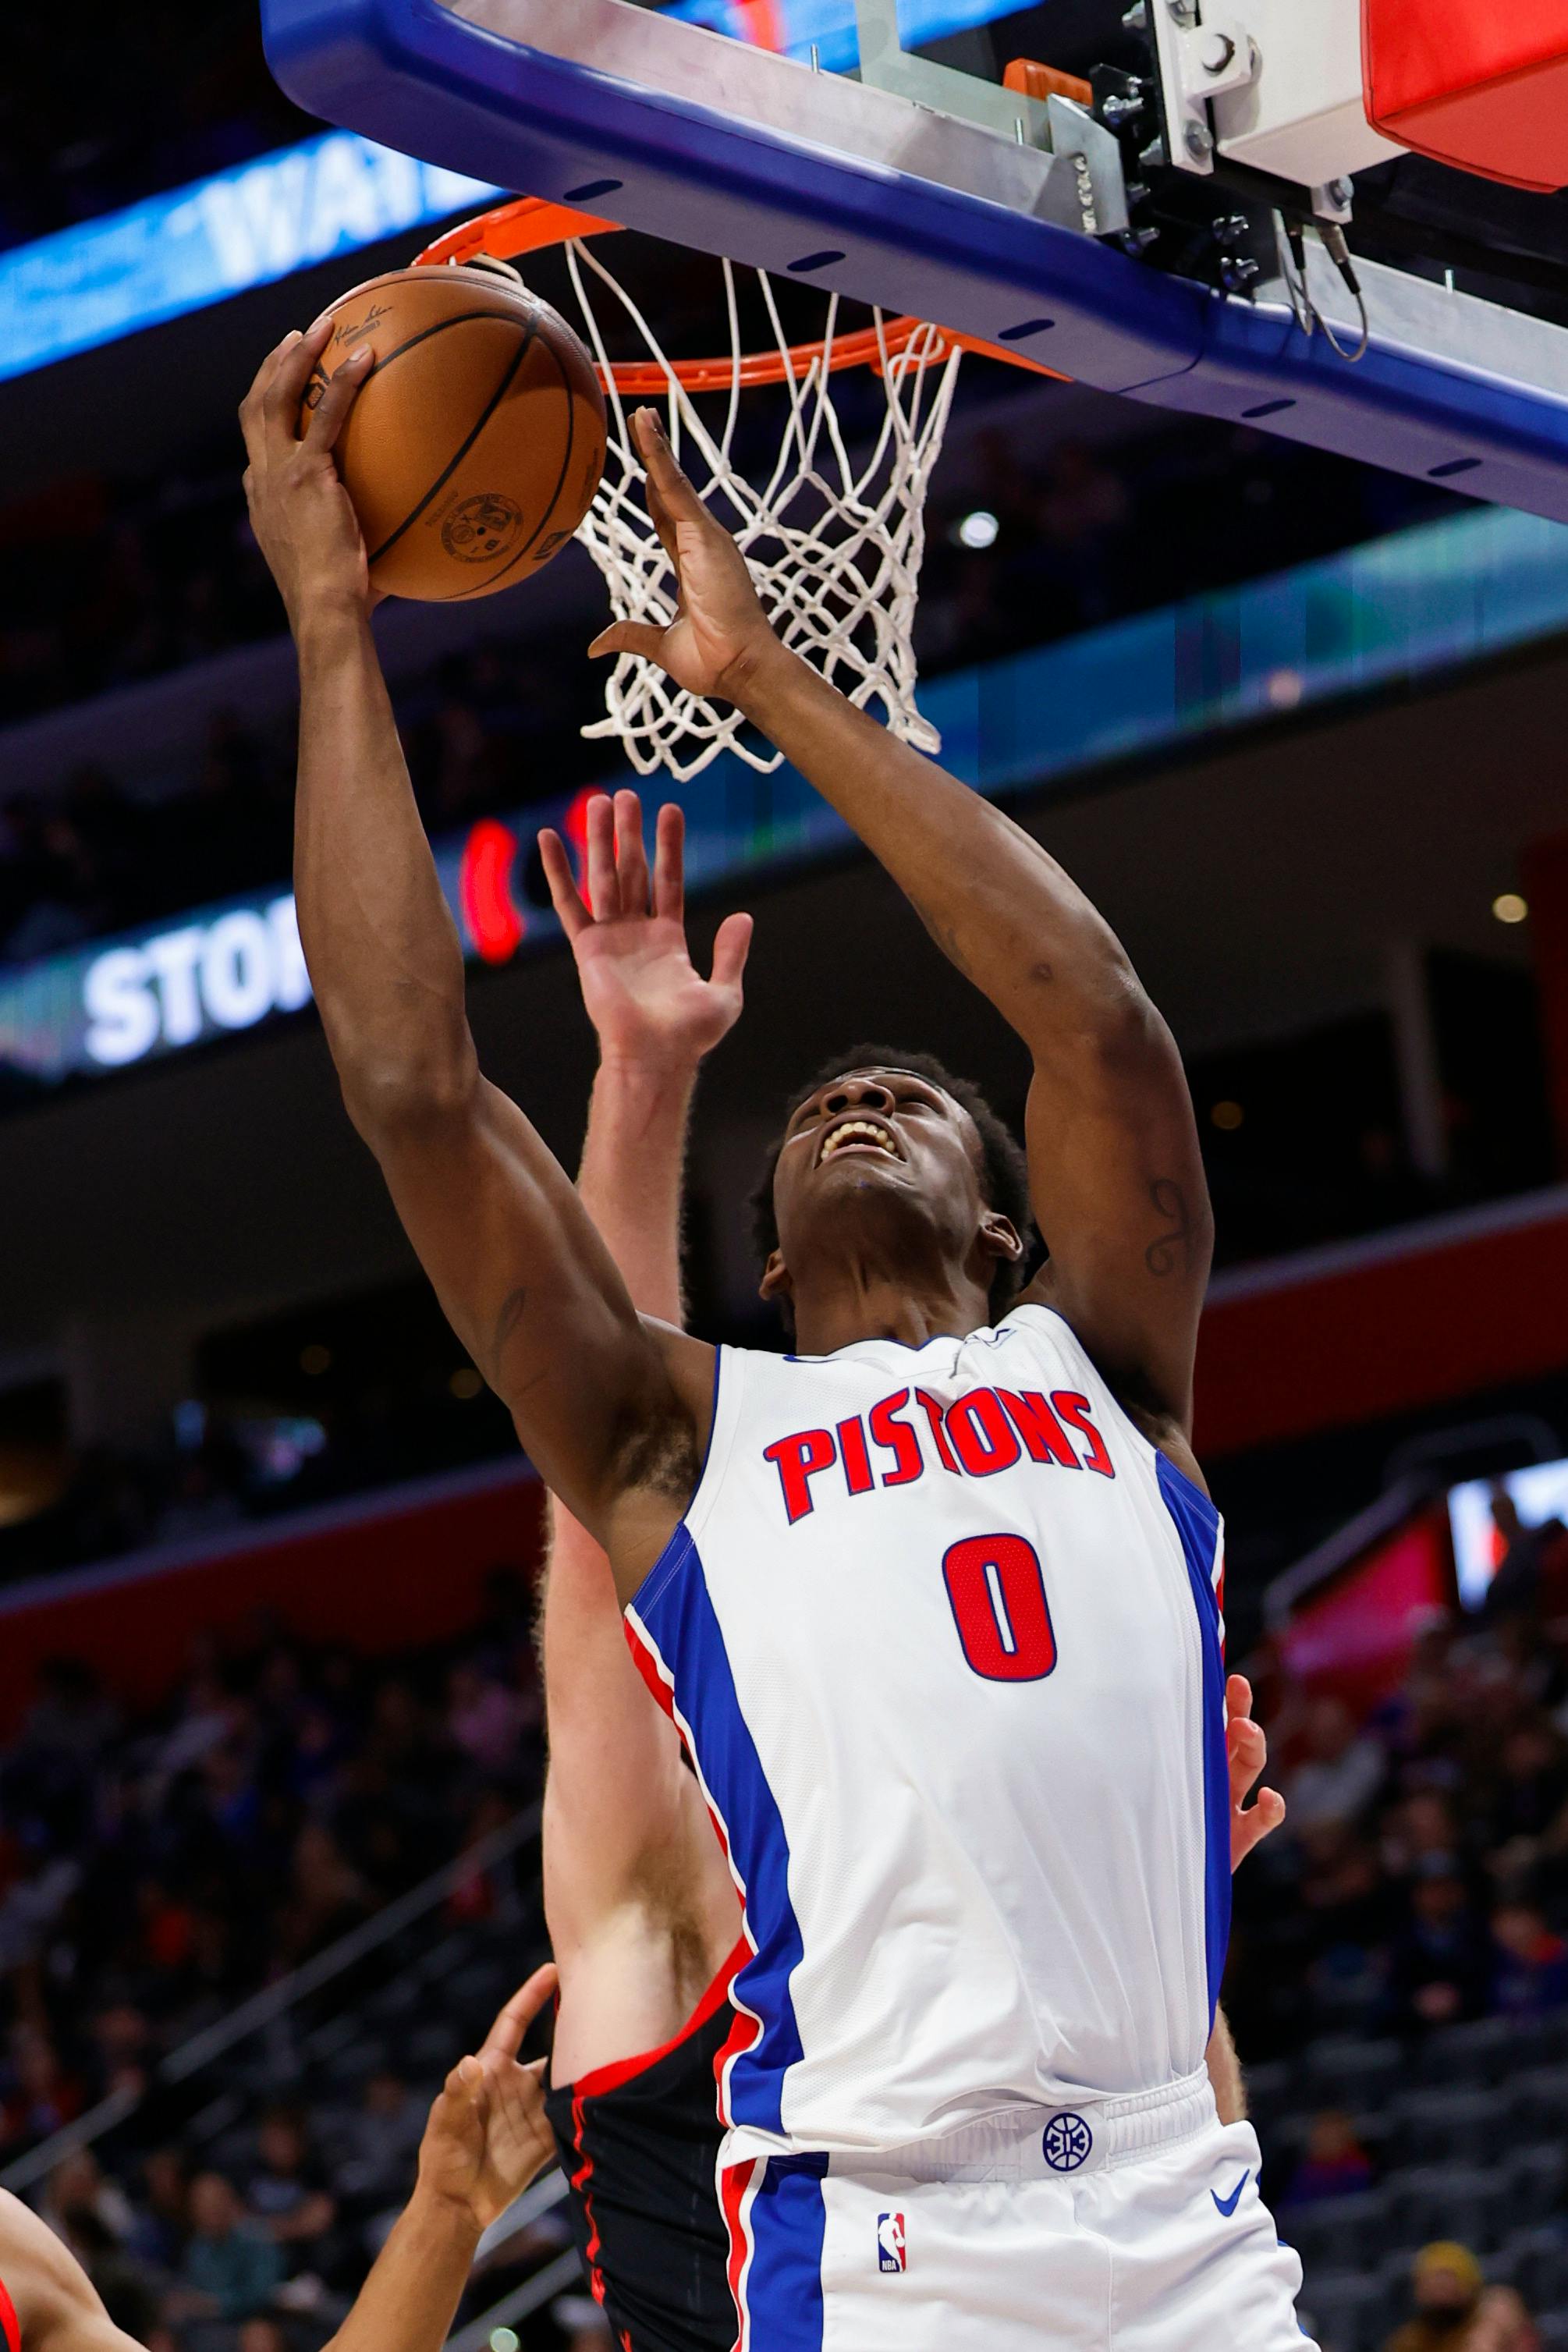 It's over: Pistons beat Raptors to end record 28-game losing